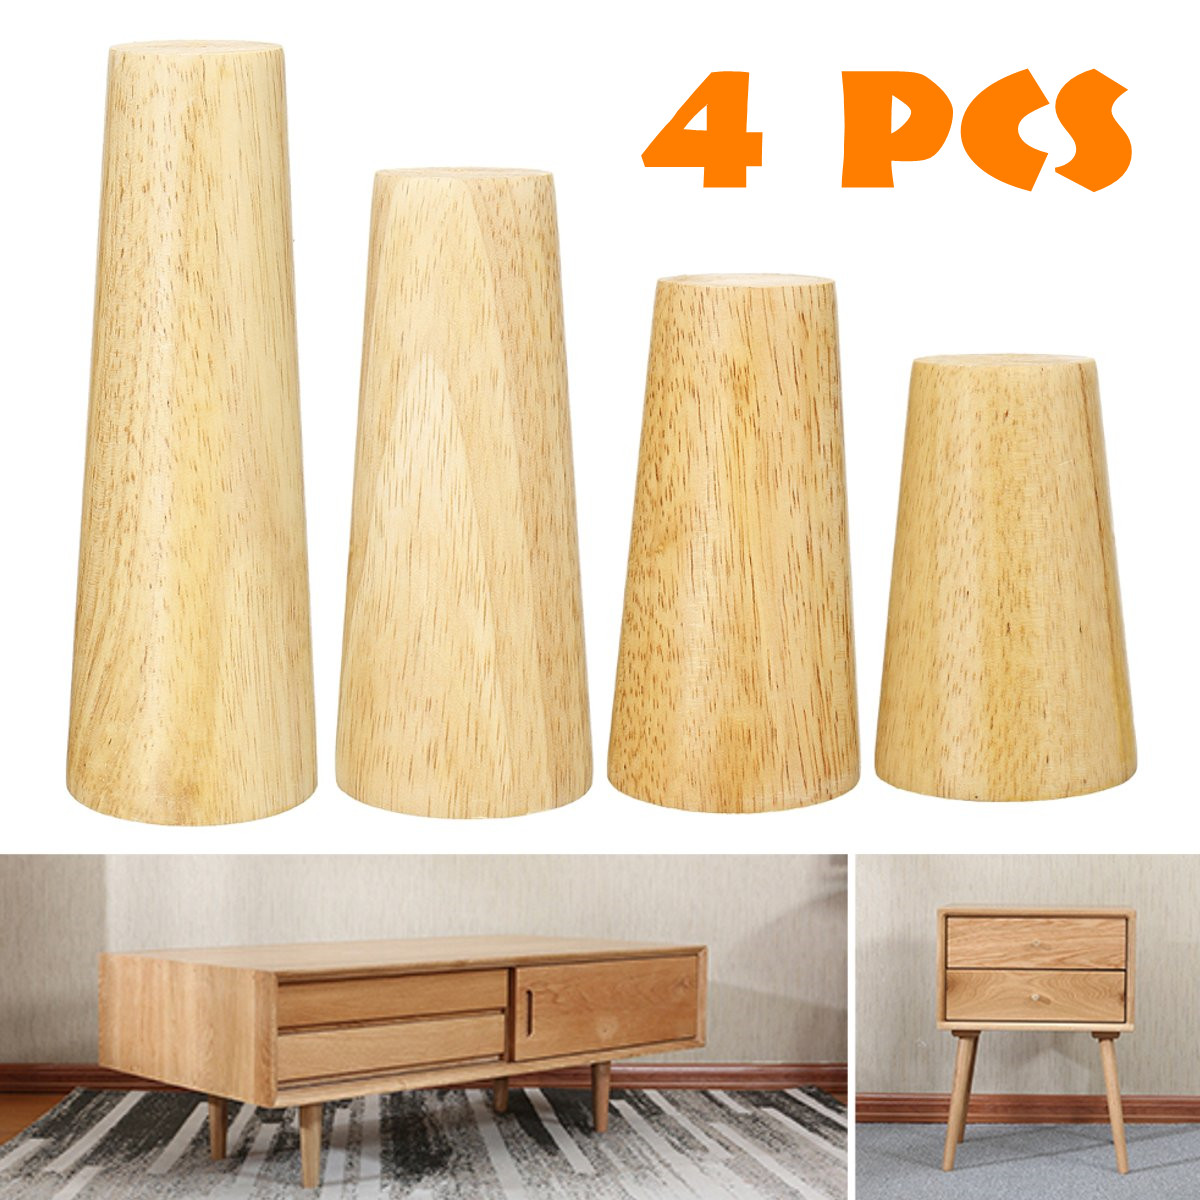 4PcsSet-Solid-Wooden-Cone-Angled-Furniture-Legs-Kit-Sofa-Table-Chair-Stool-Part-Leg-Support-1631830-1